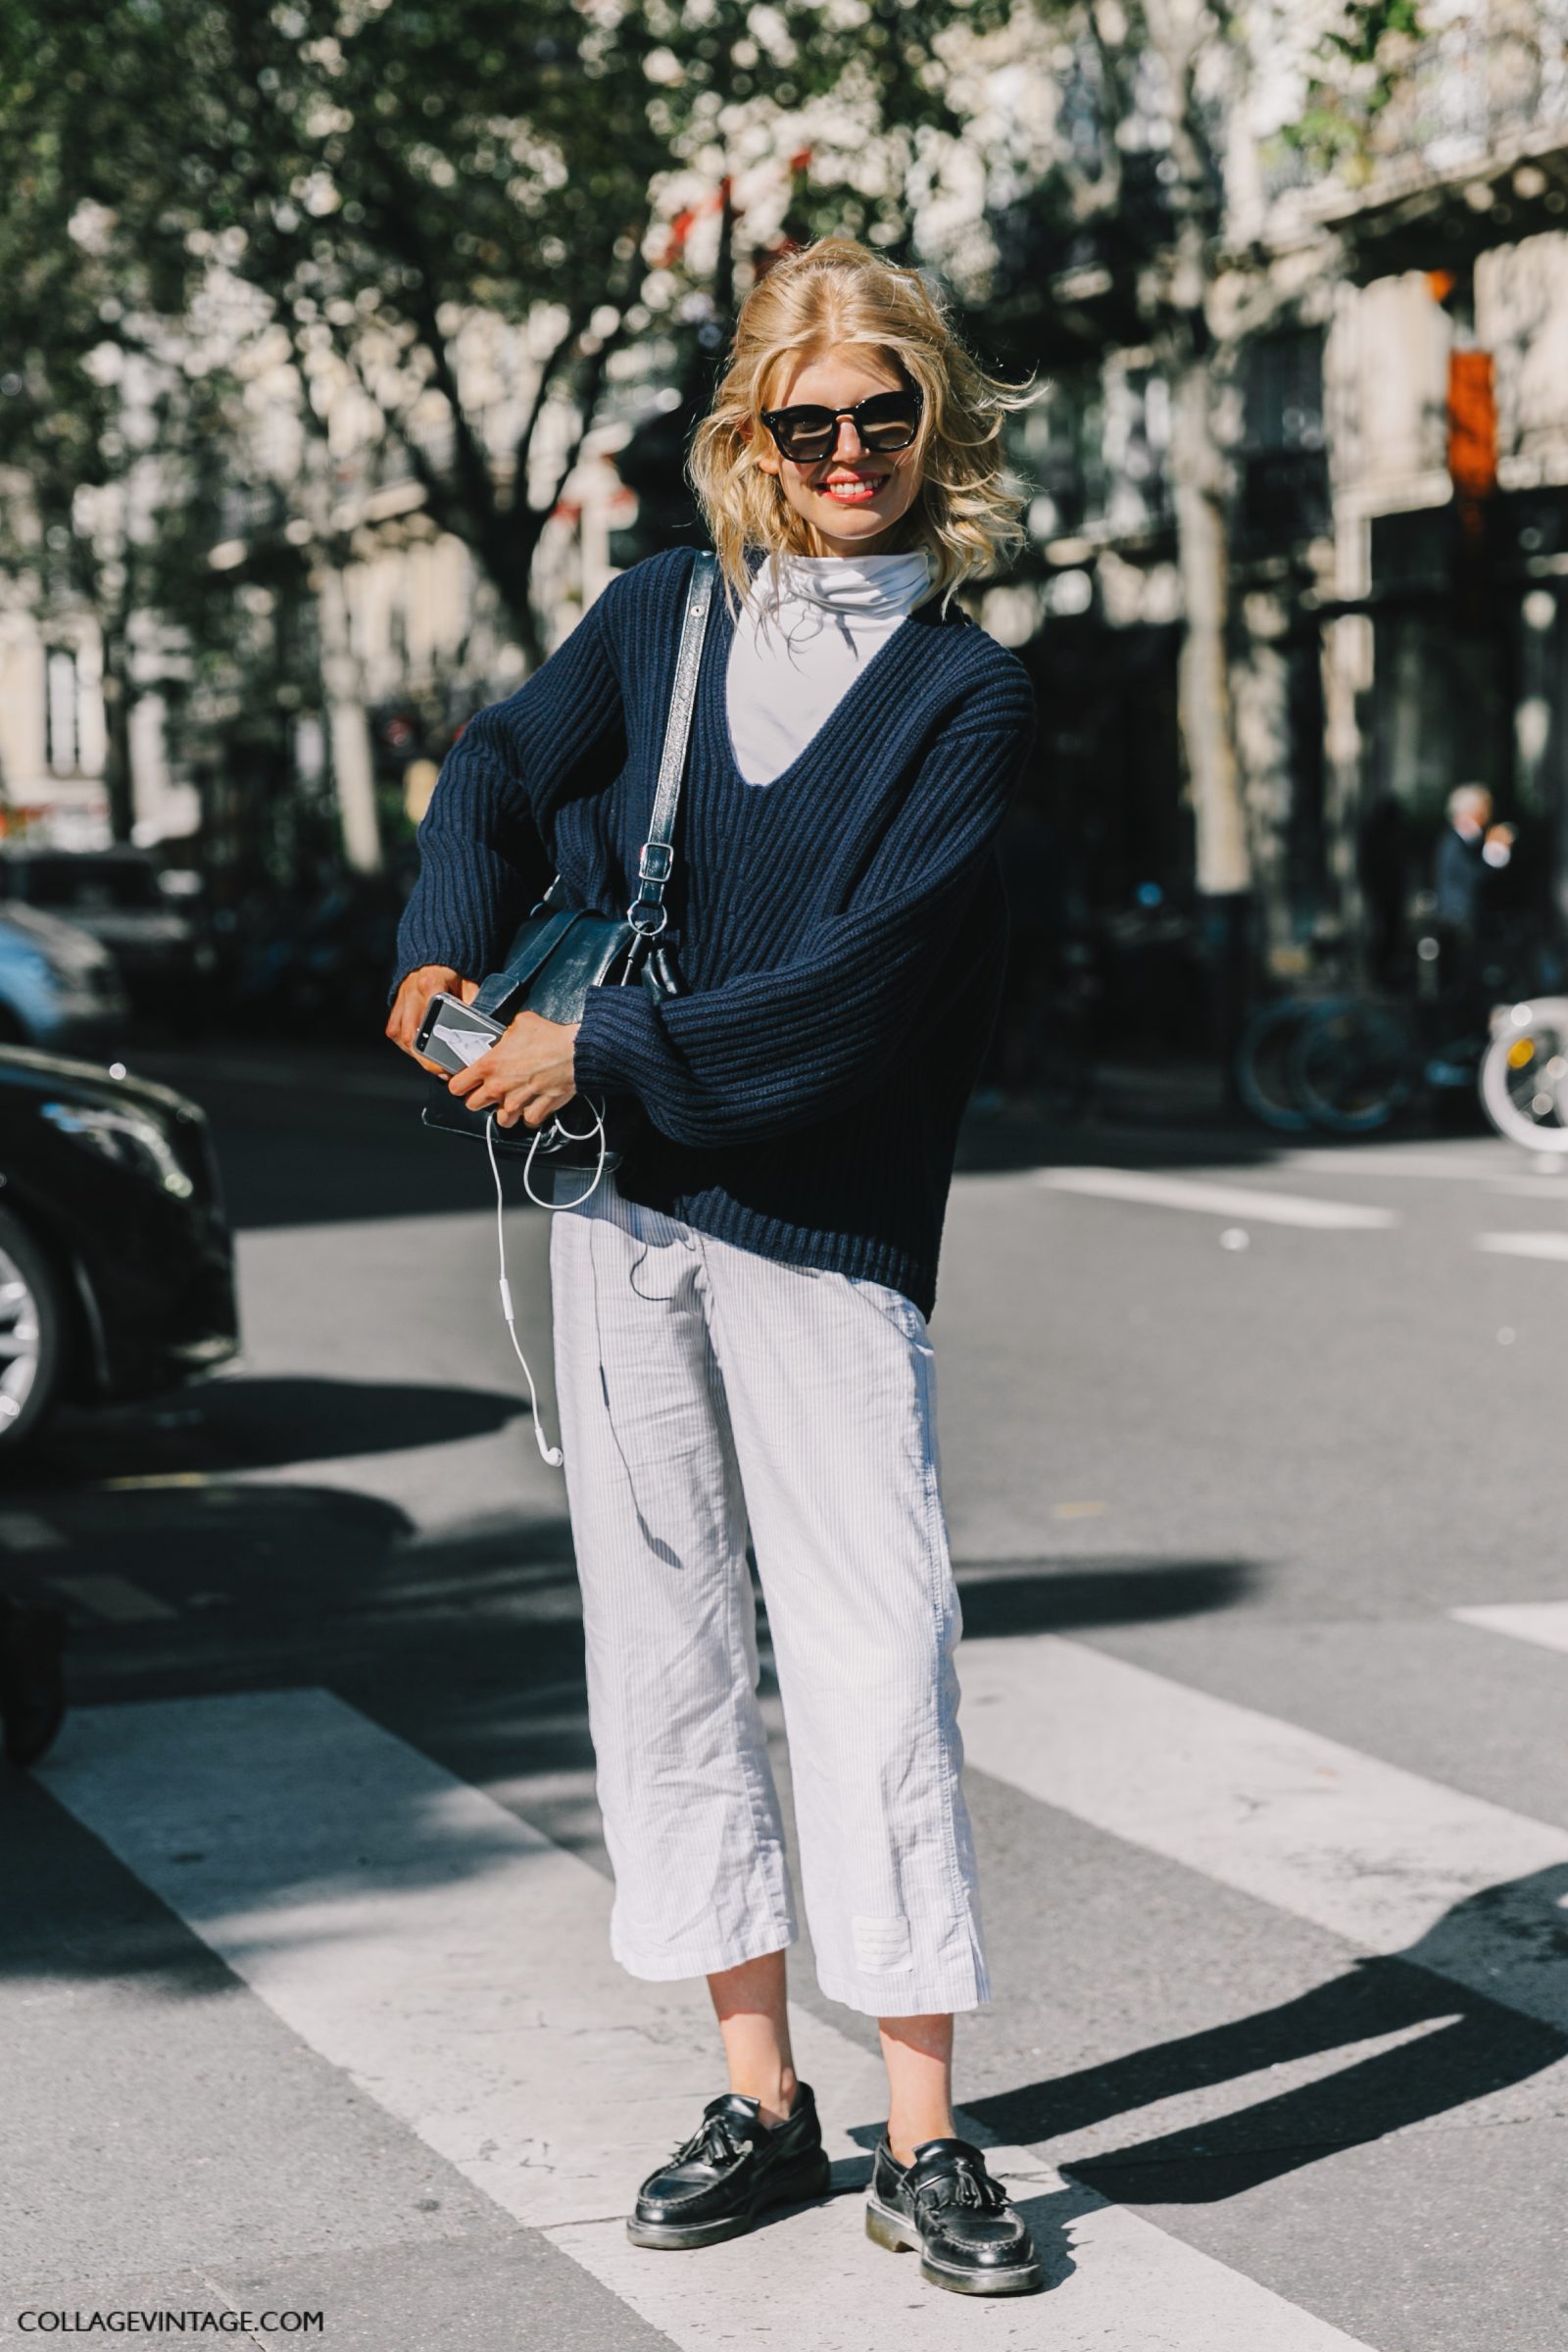 pfw-paris_fashion_week_ss17-street_style-outfits-collage_vintage-chanel-ellery-142-1600x2400